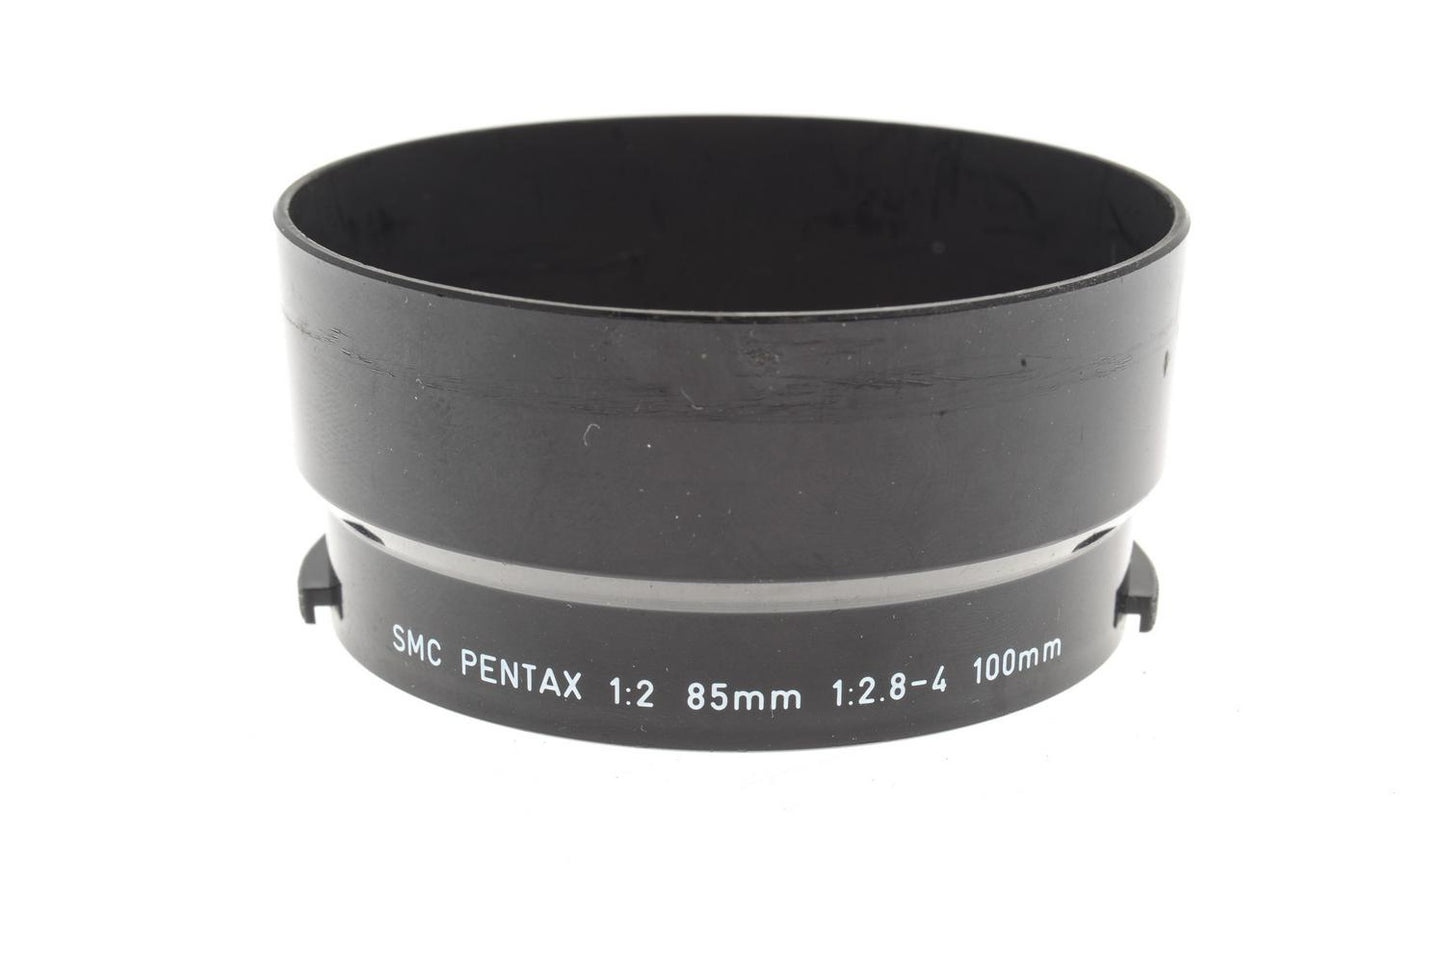 Pentax 49mm Lens Hood for 85mm f2 and 100mm f2.8/4 - Accessory